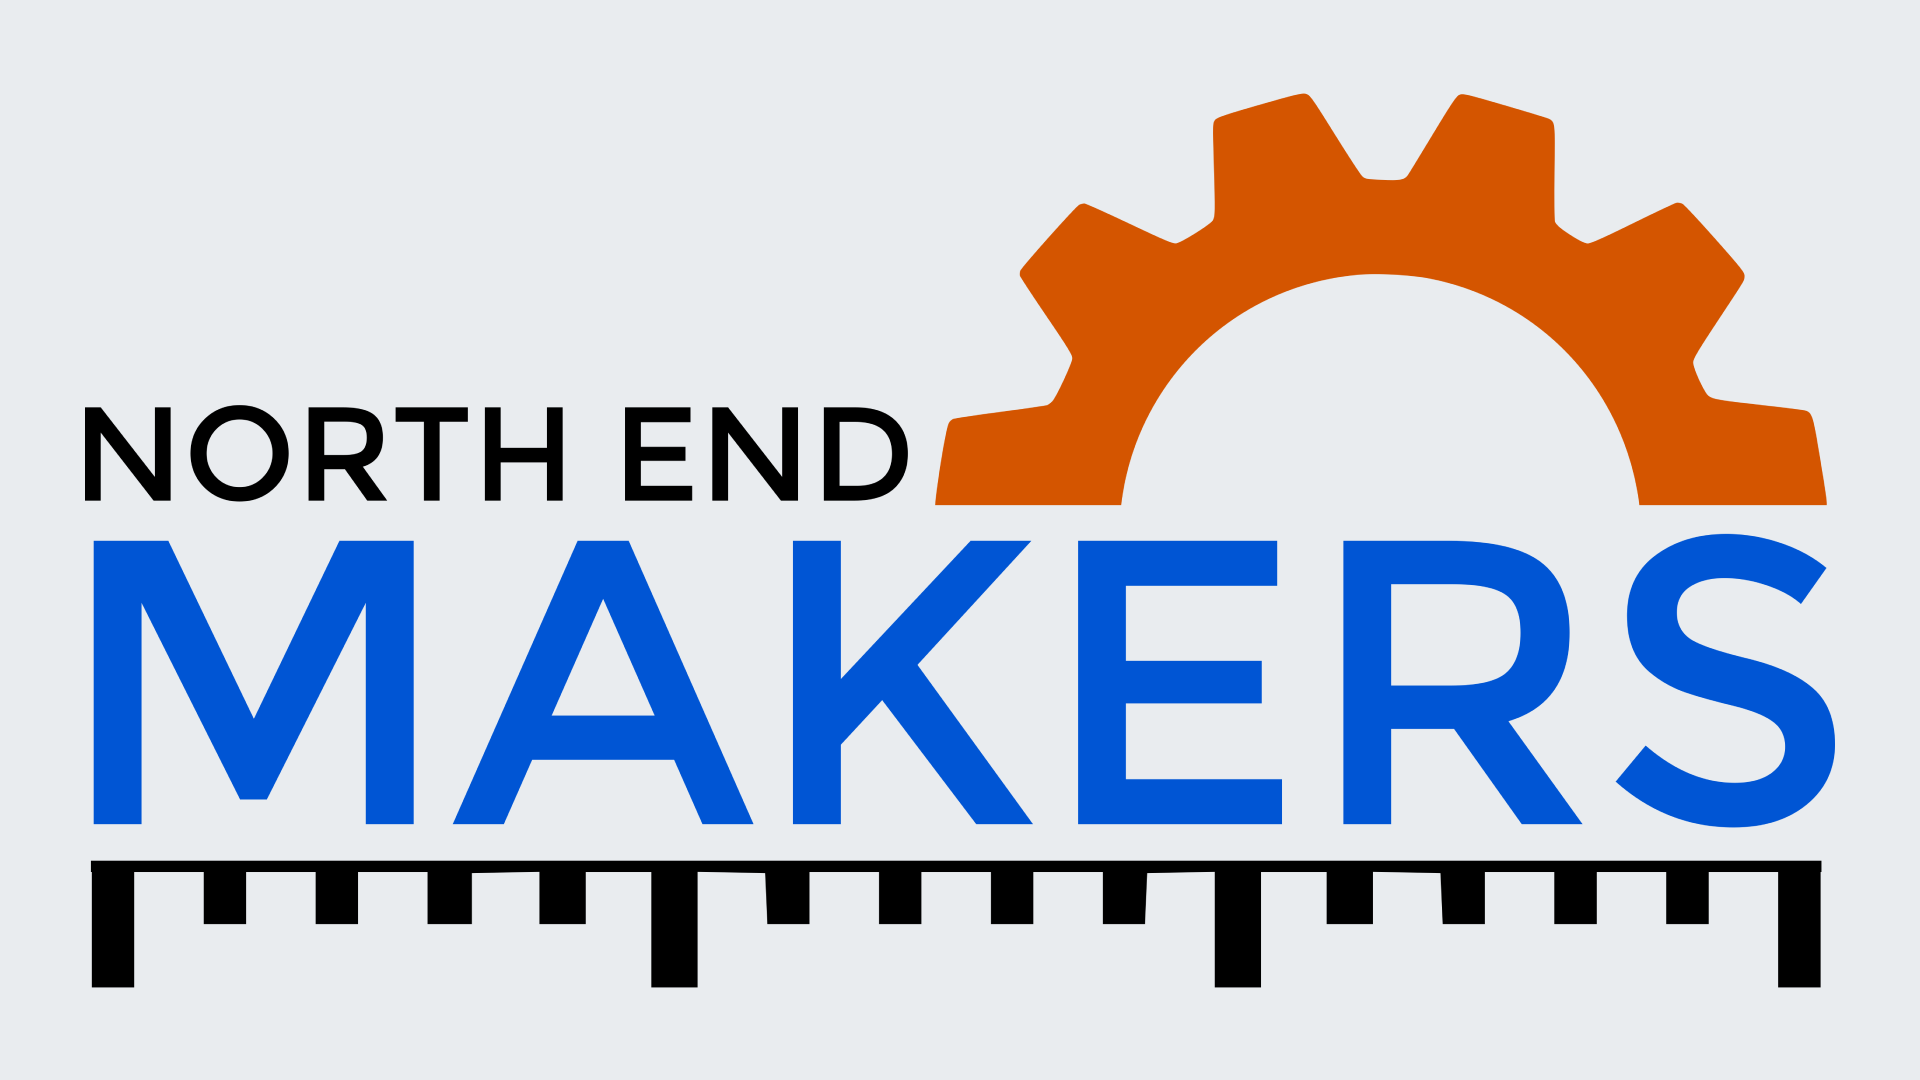 The logo for north end makers